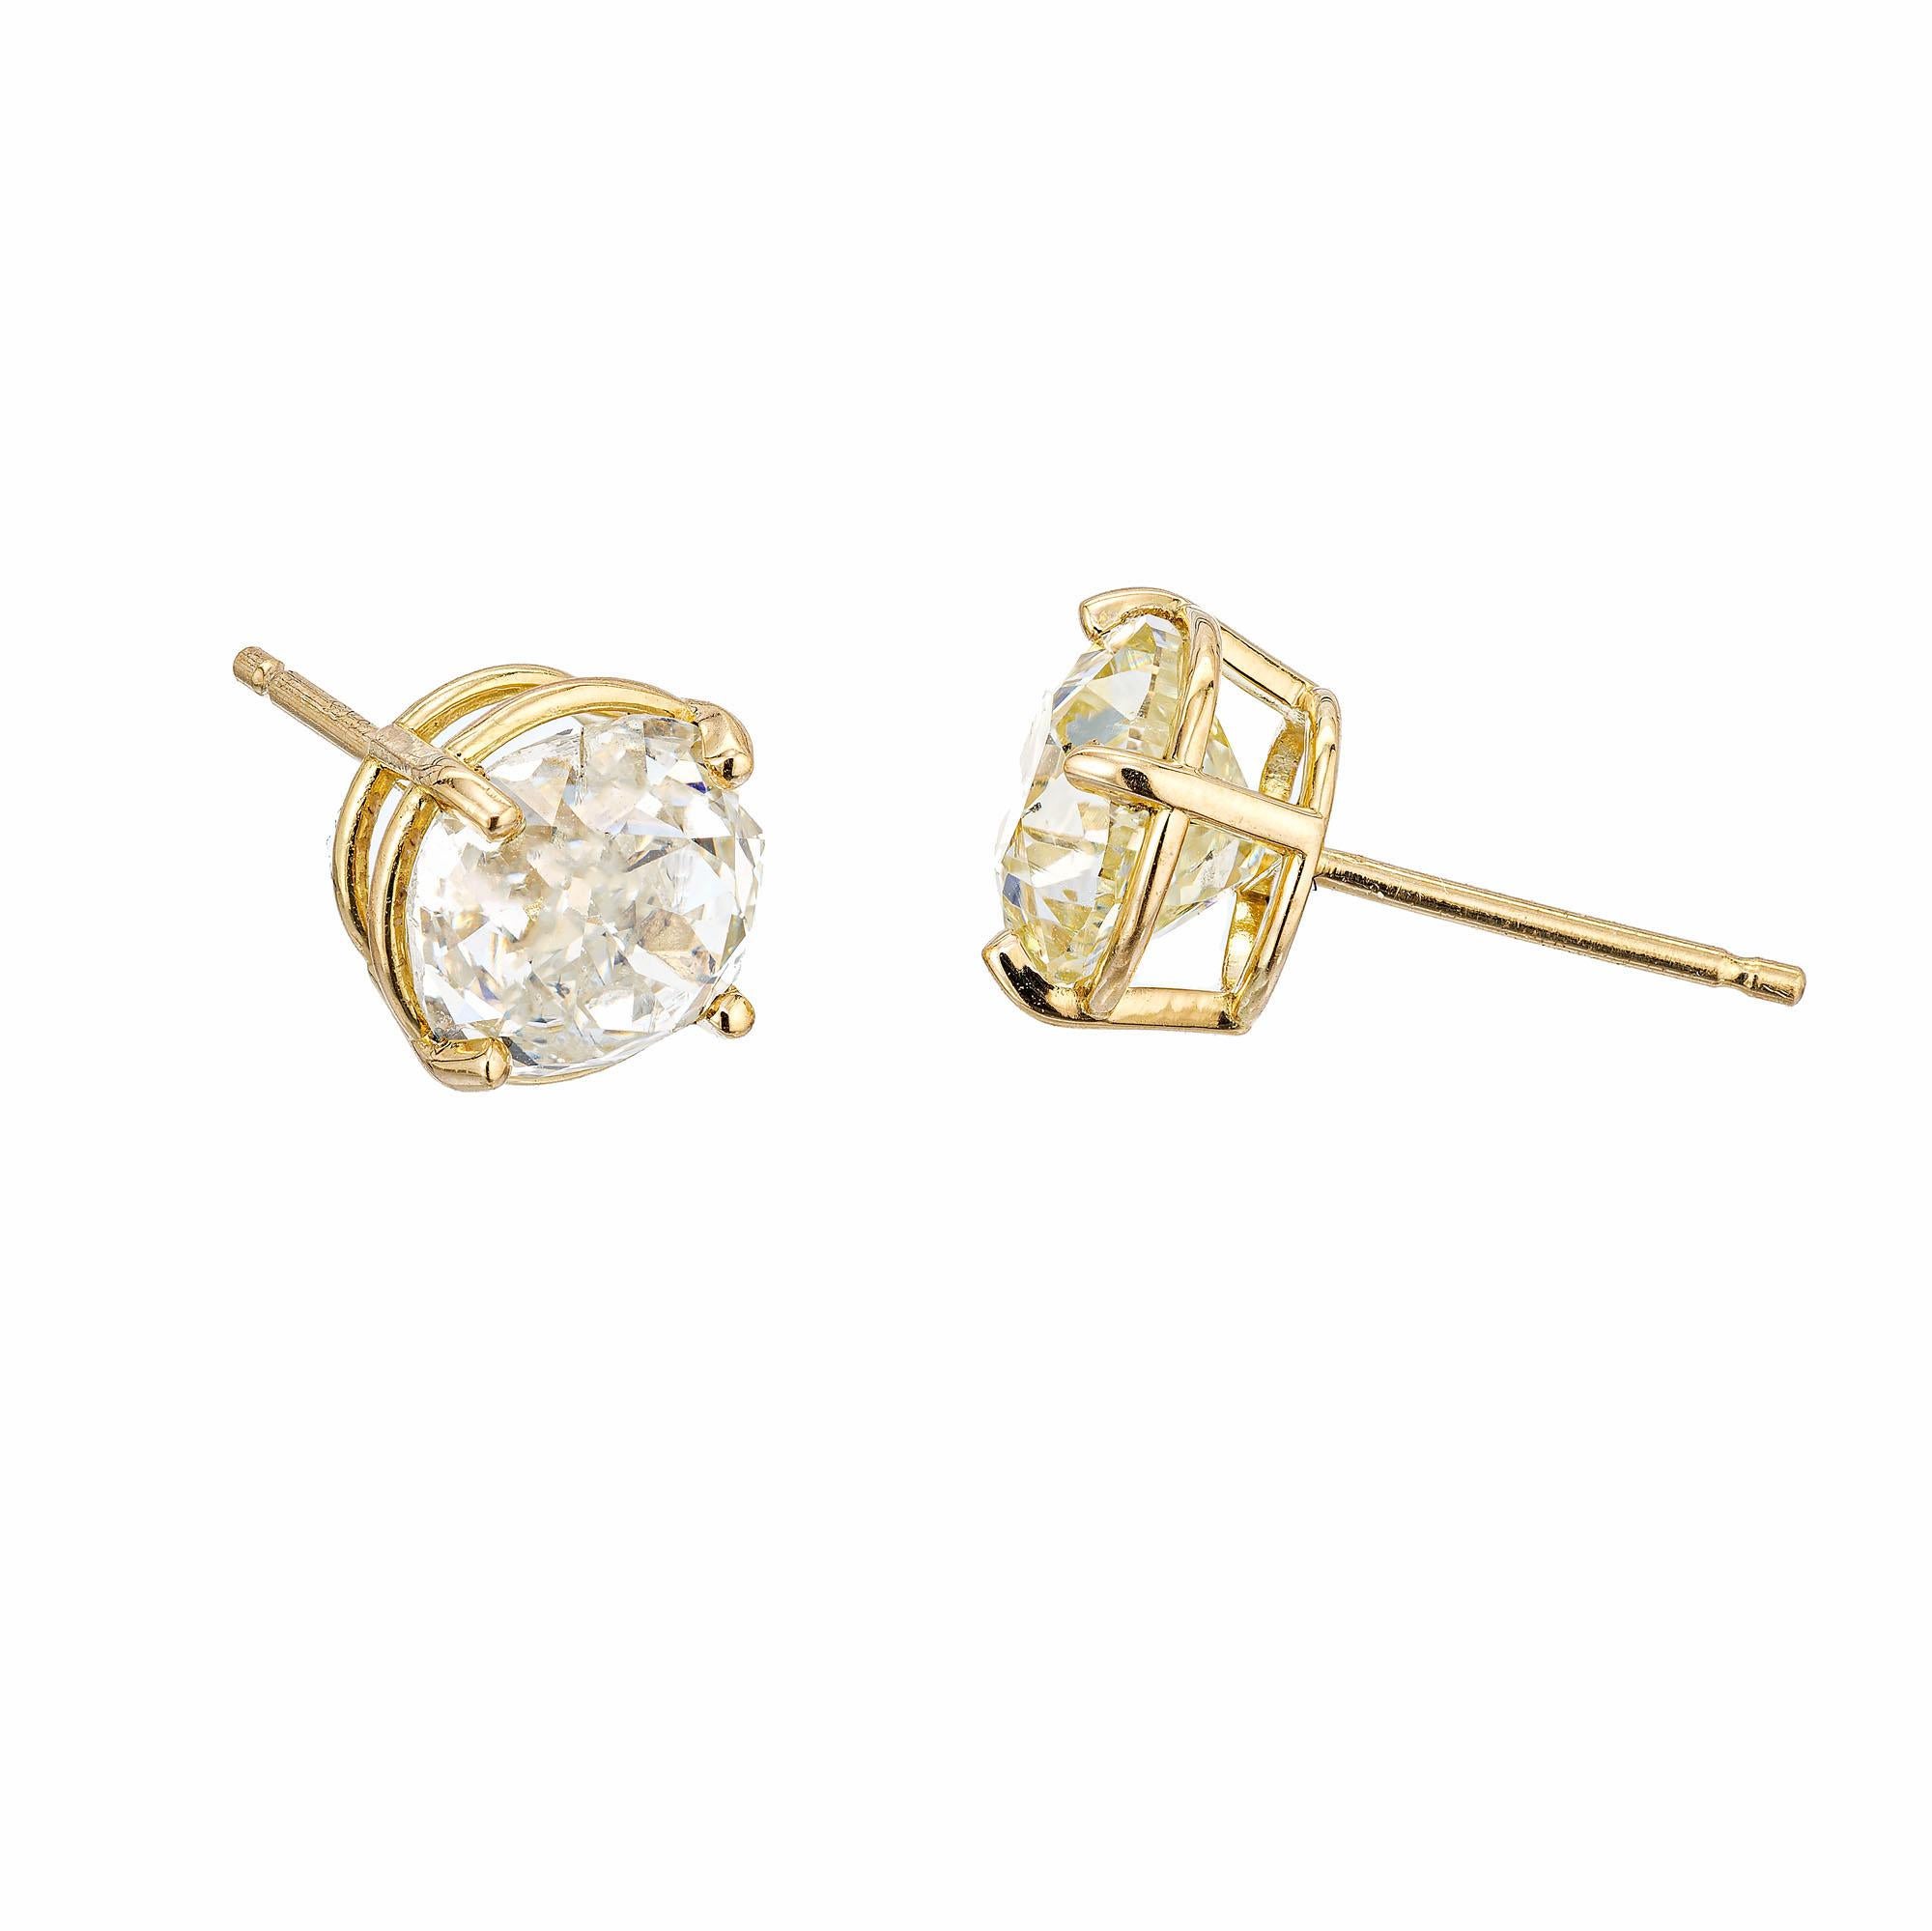 Peter Suchy GIA Certified 3.25 Carat Diamond Yellow Gold Stud Earrings For Sale 1